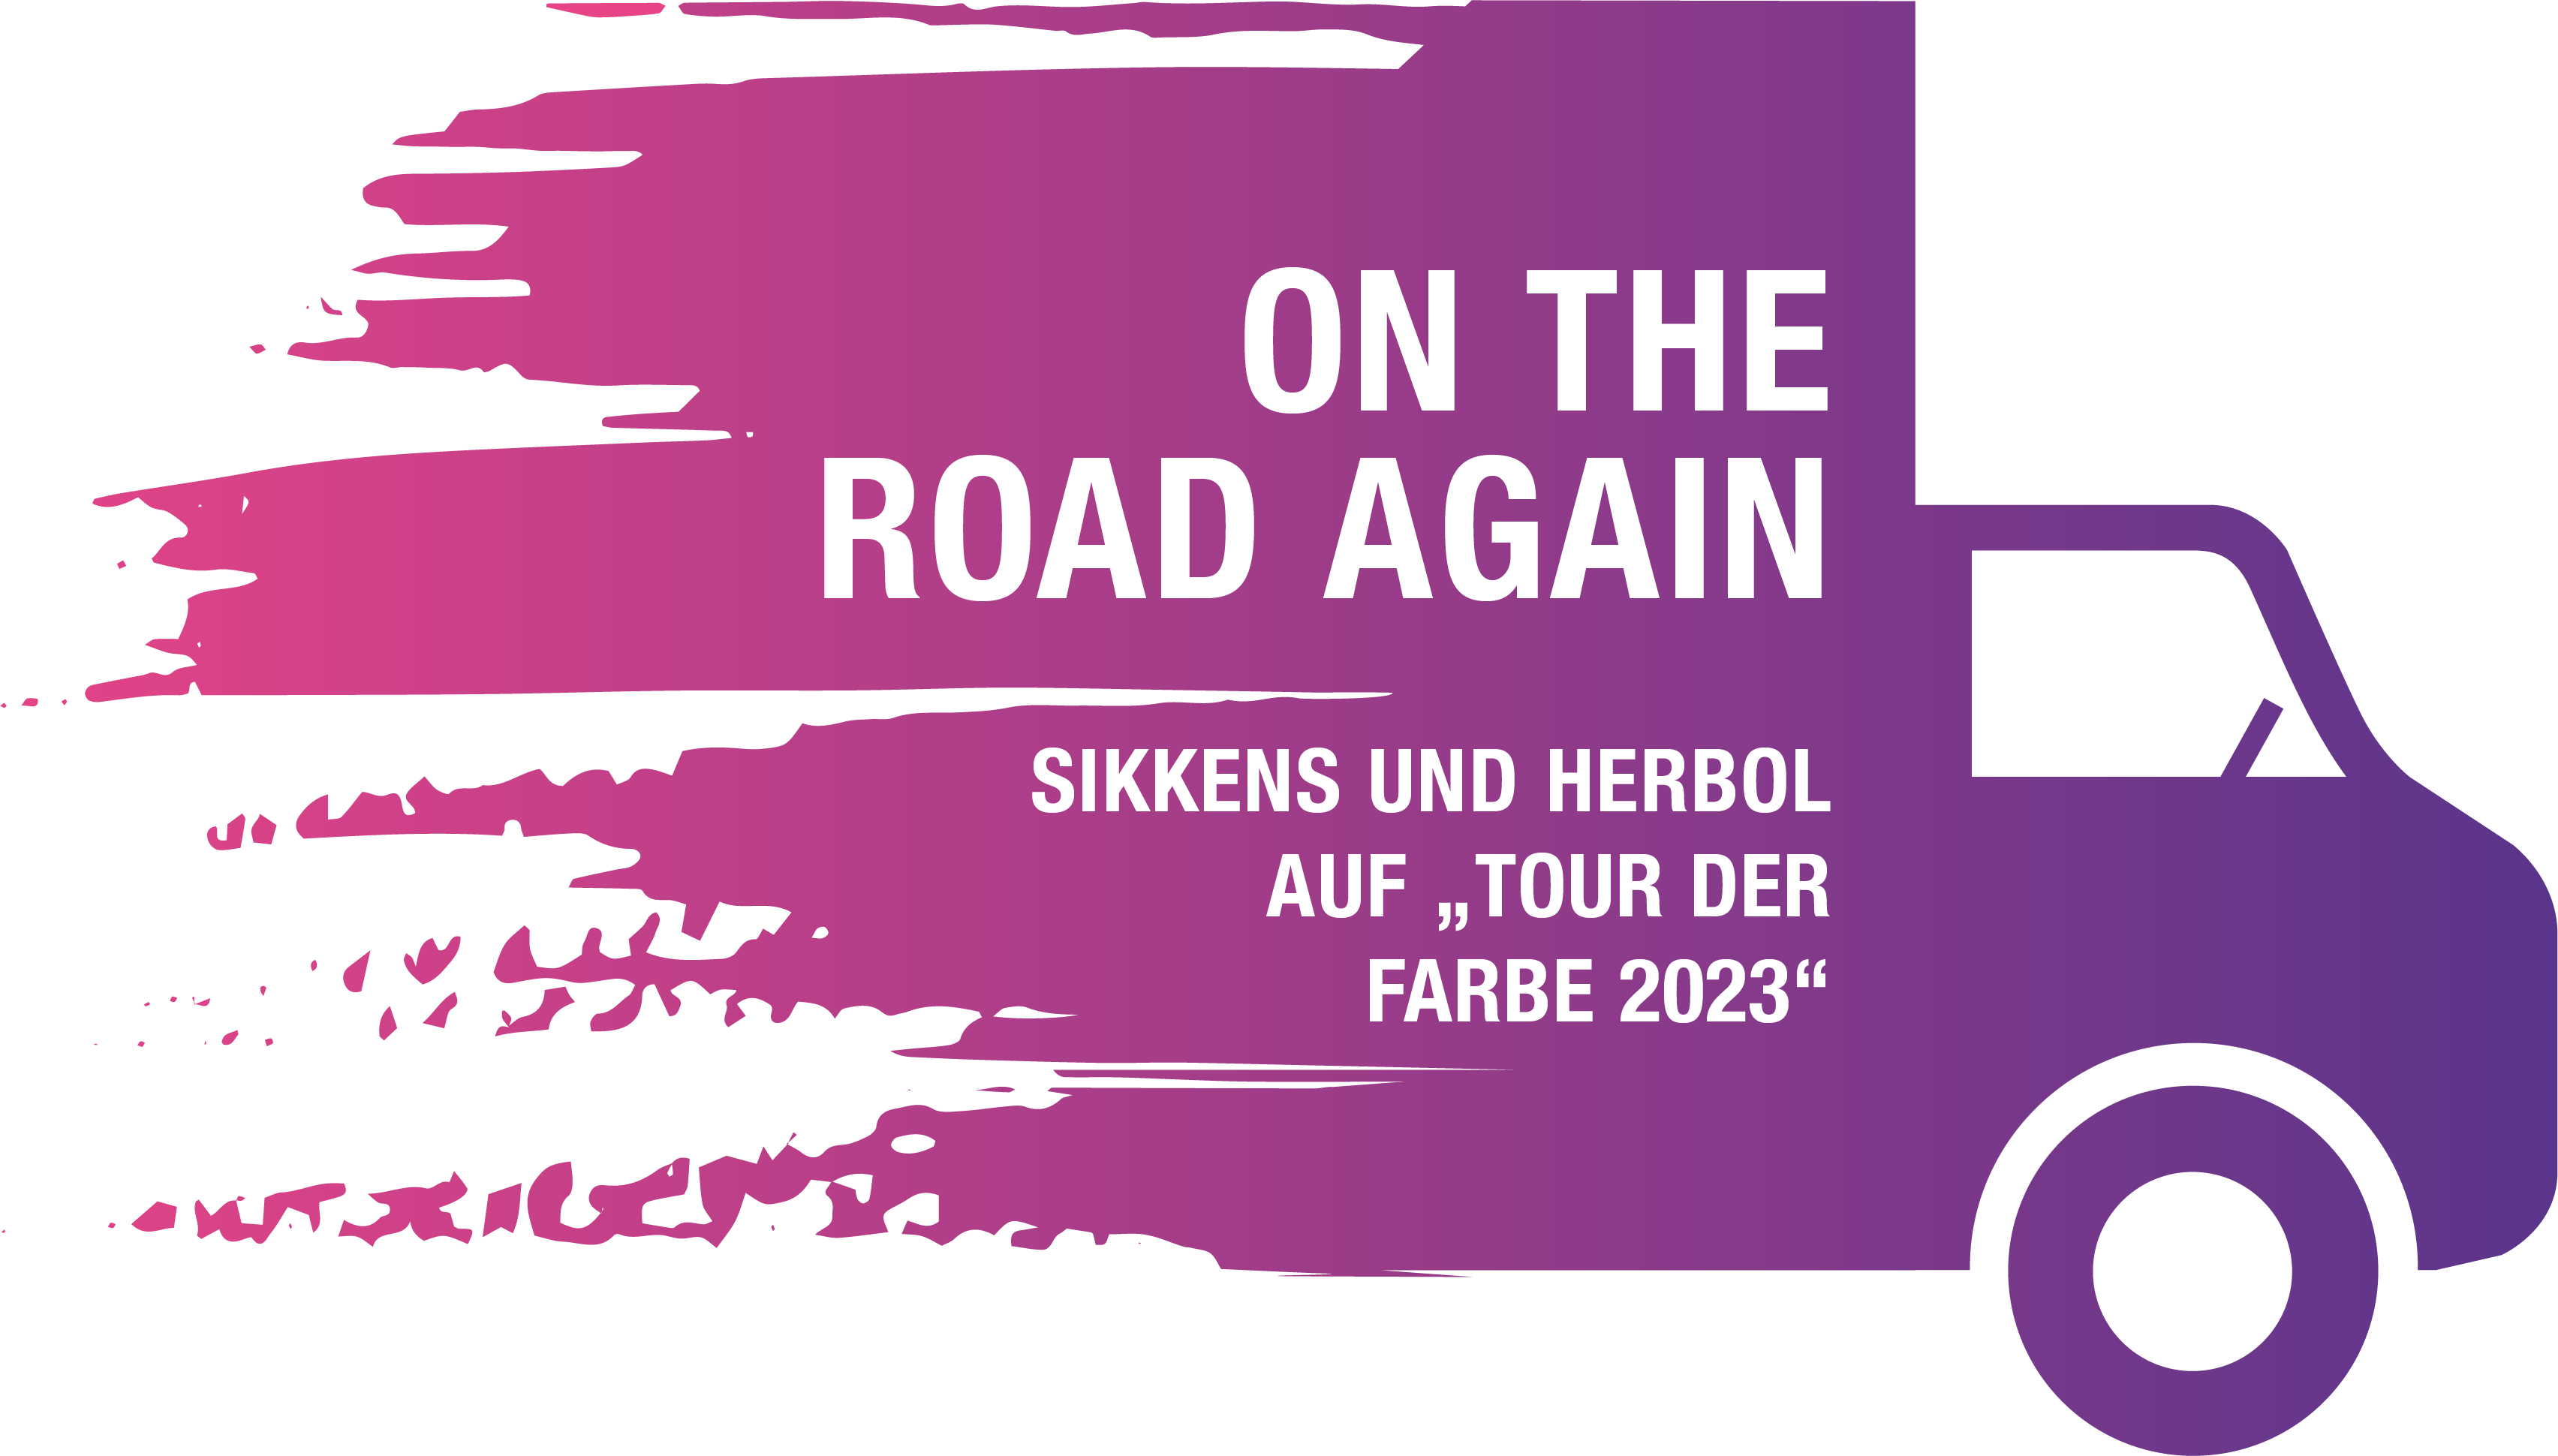 Tour der Farbe On the road again